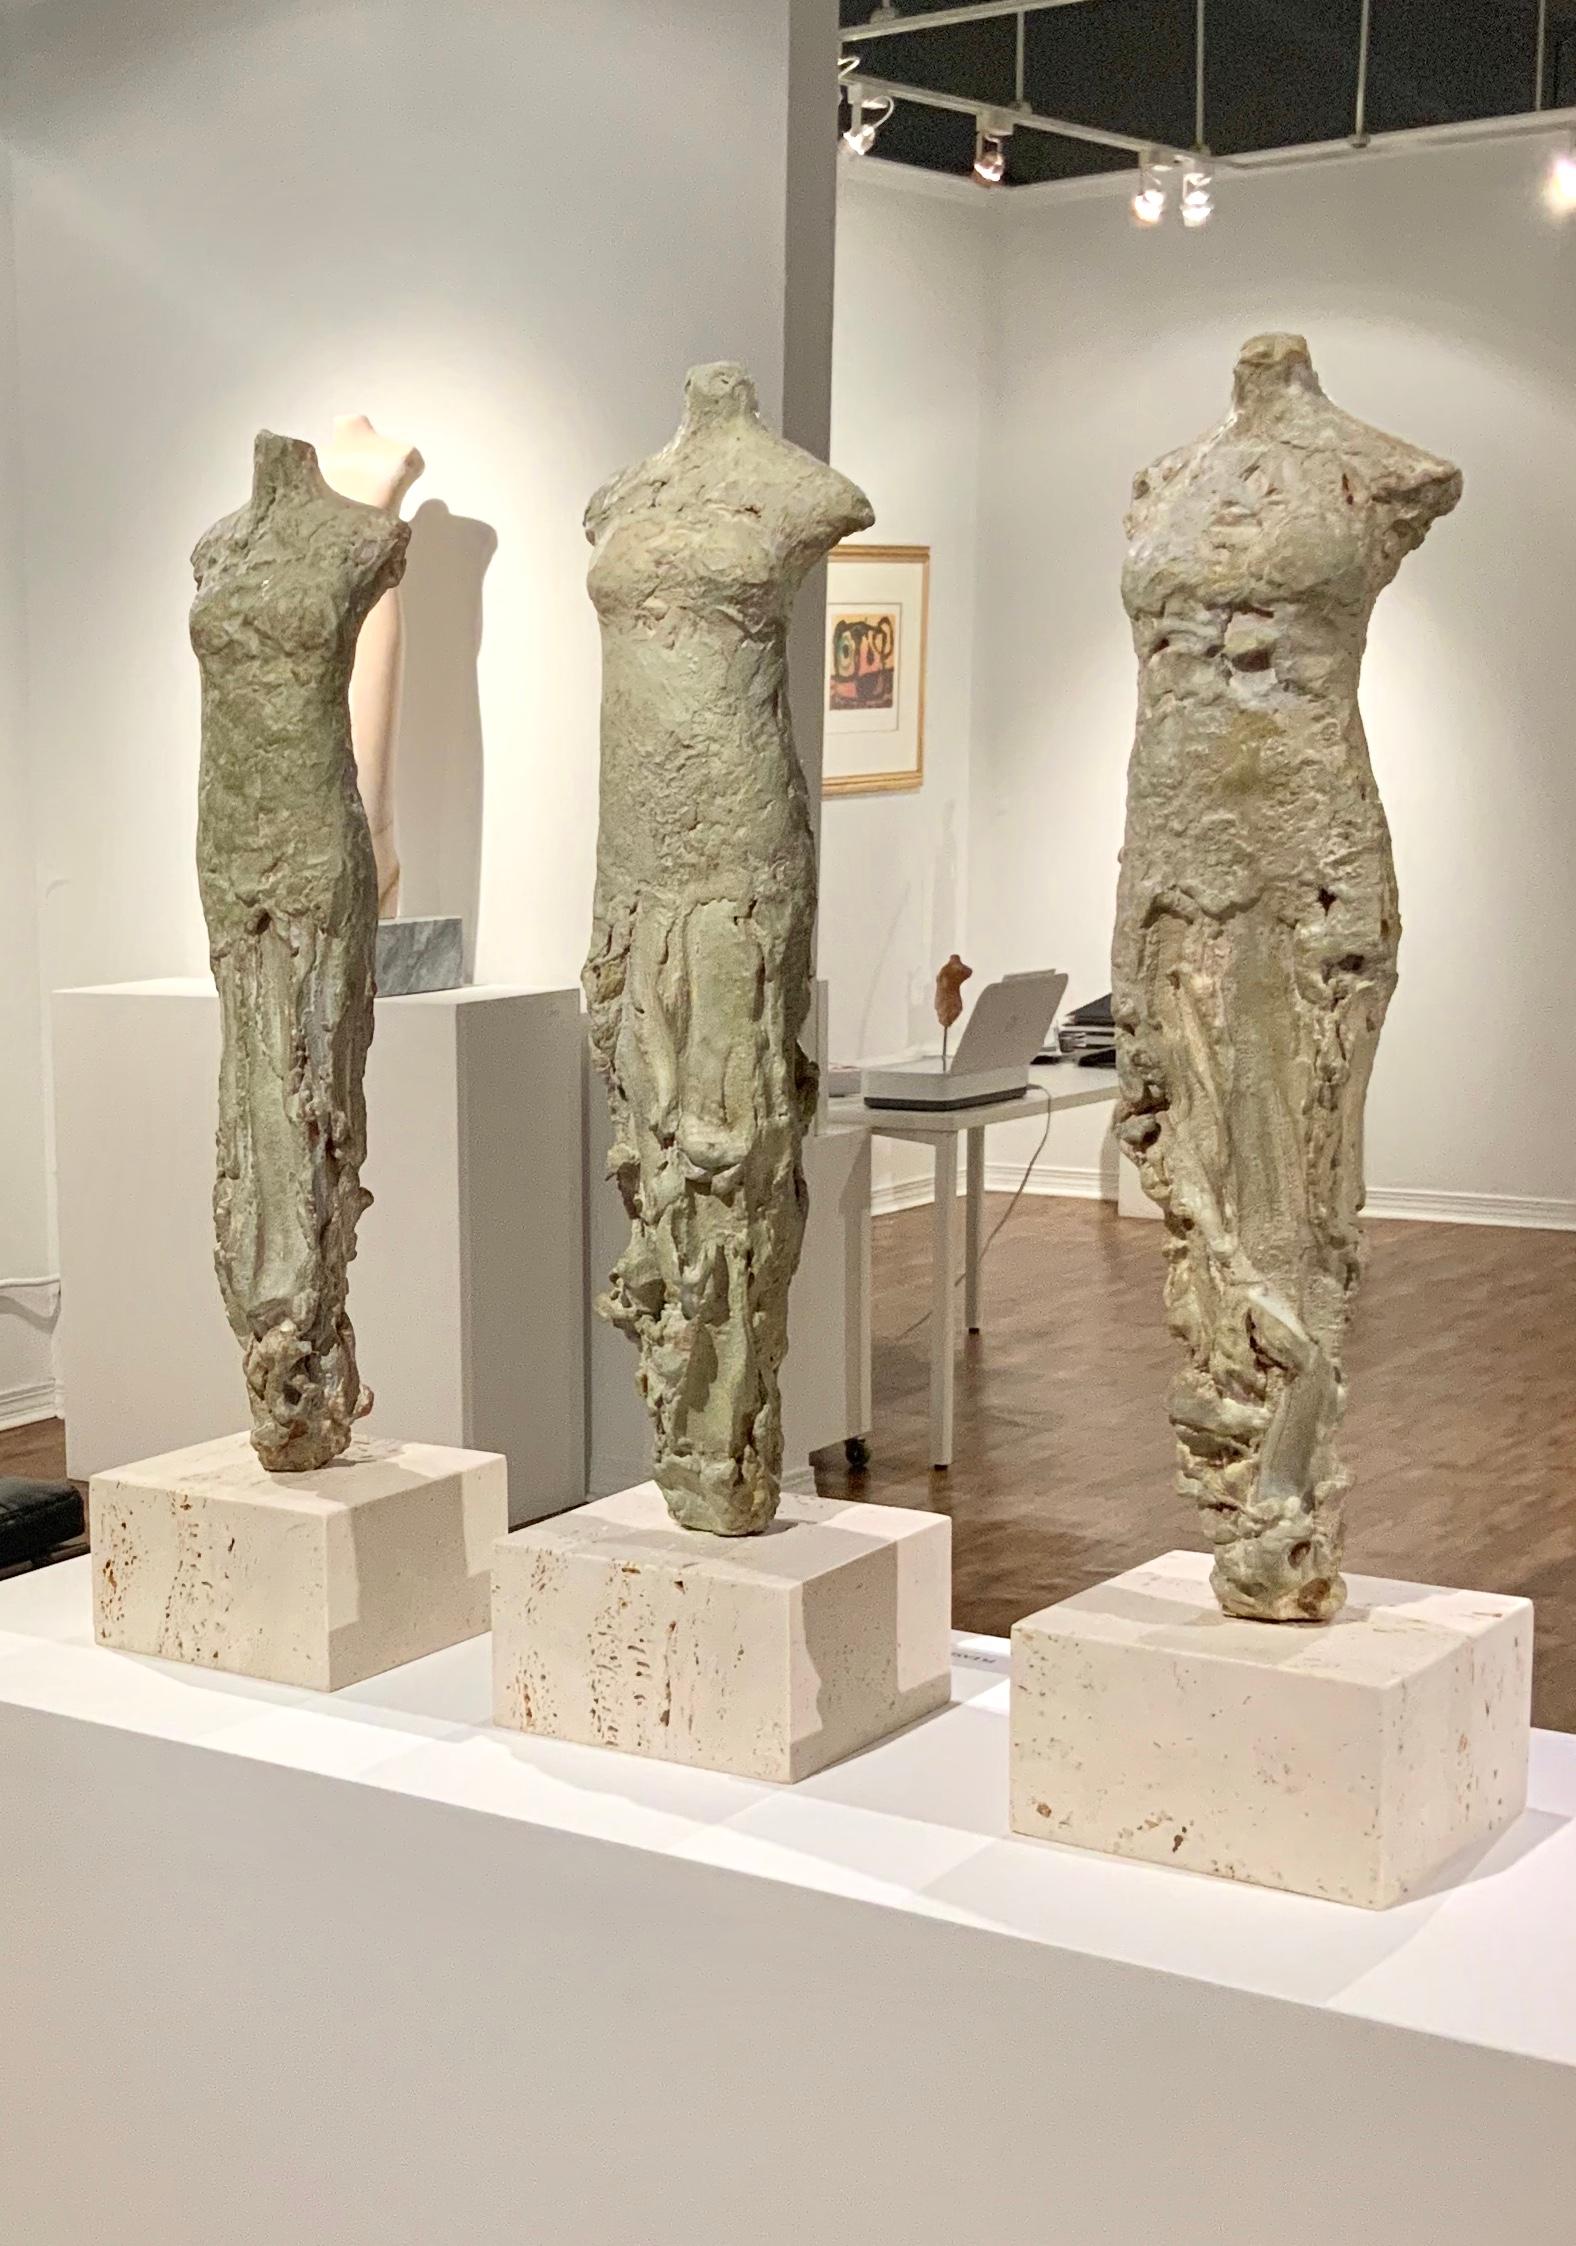 Claire McArdle. TORSO . Terra cotta, terra sigillata, travertine base. Two available. Each unique. 26” H x 7” x 7”. Hand signed. 

A native of the Washington D.C. area, after earning a Fine Arts degree from Virginia Commonwealth University, Claire